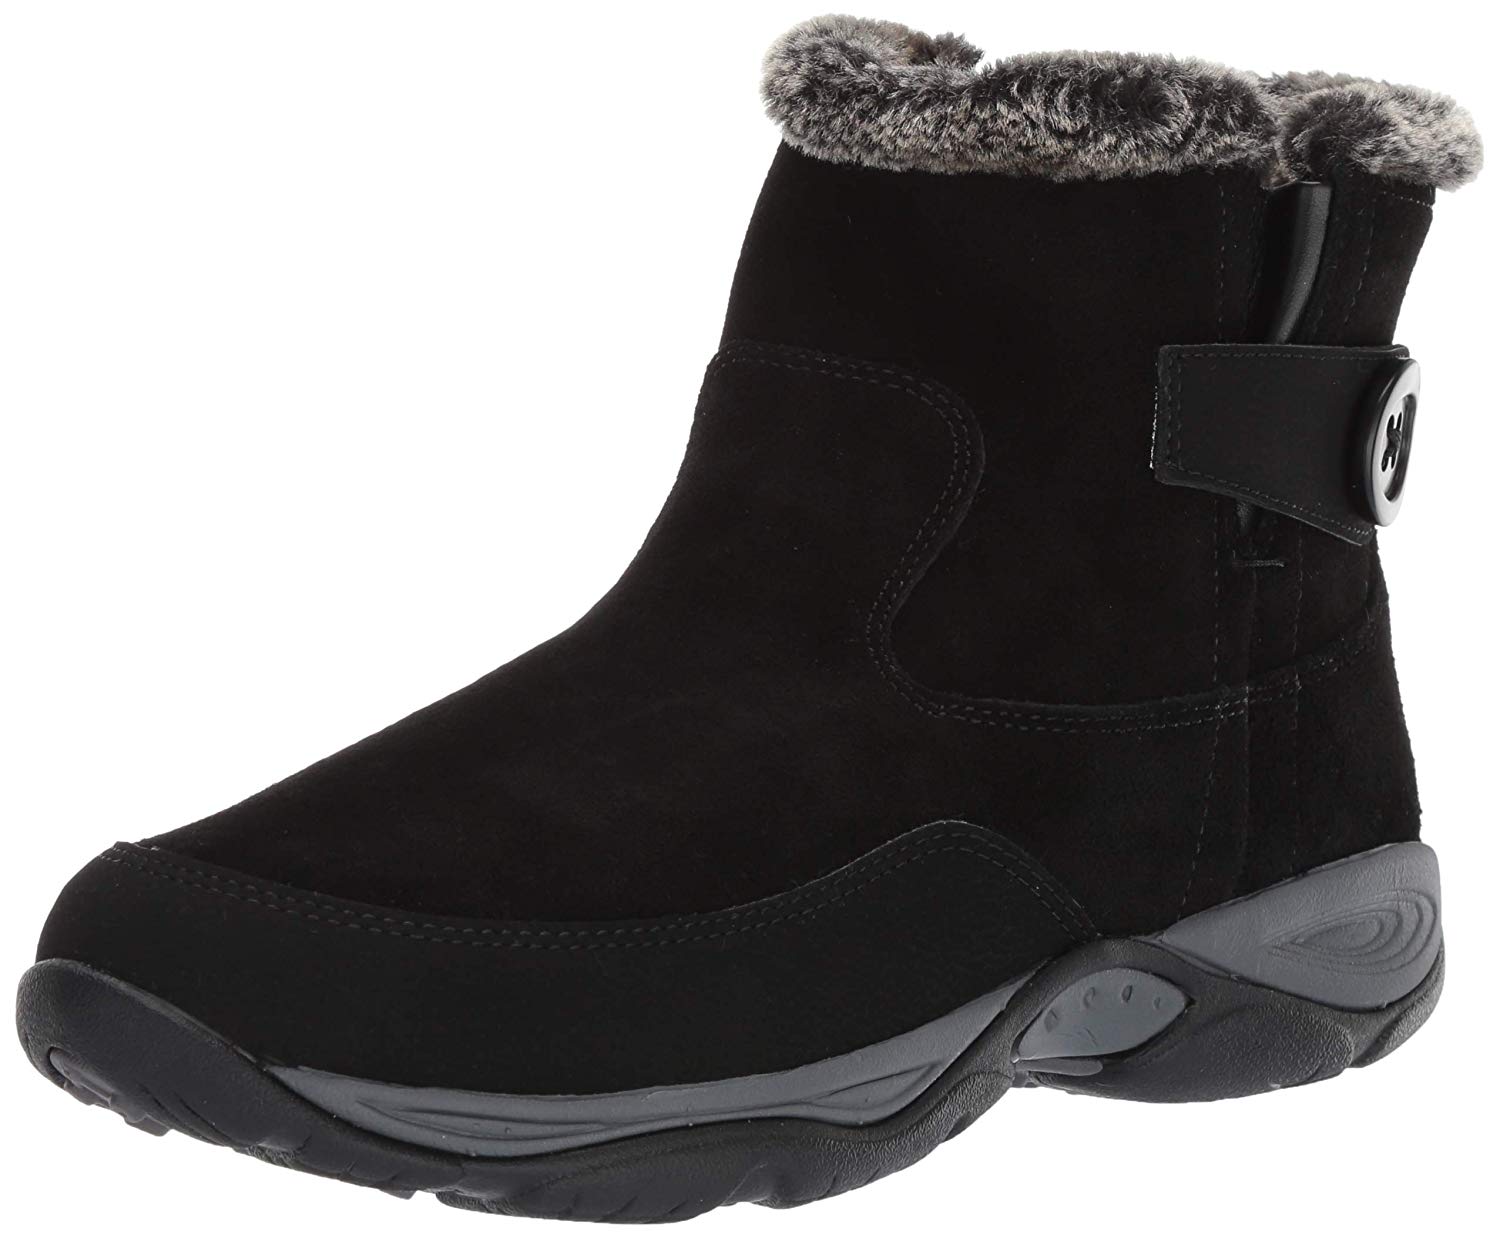 EXCEL8 Ankle Boot, Black 